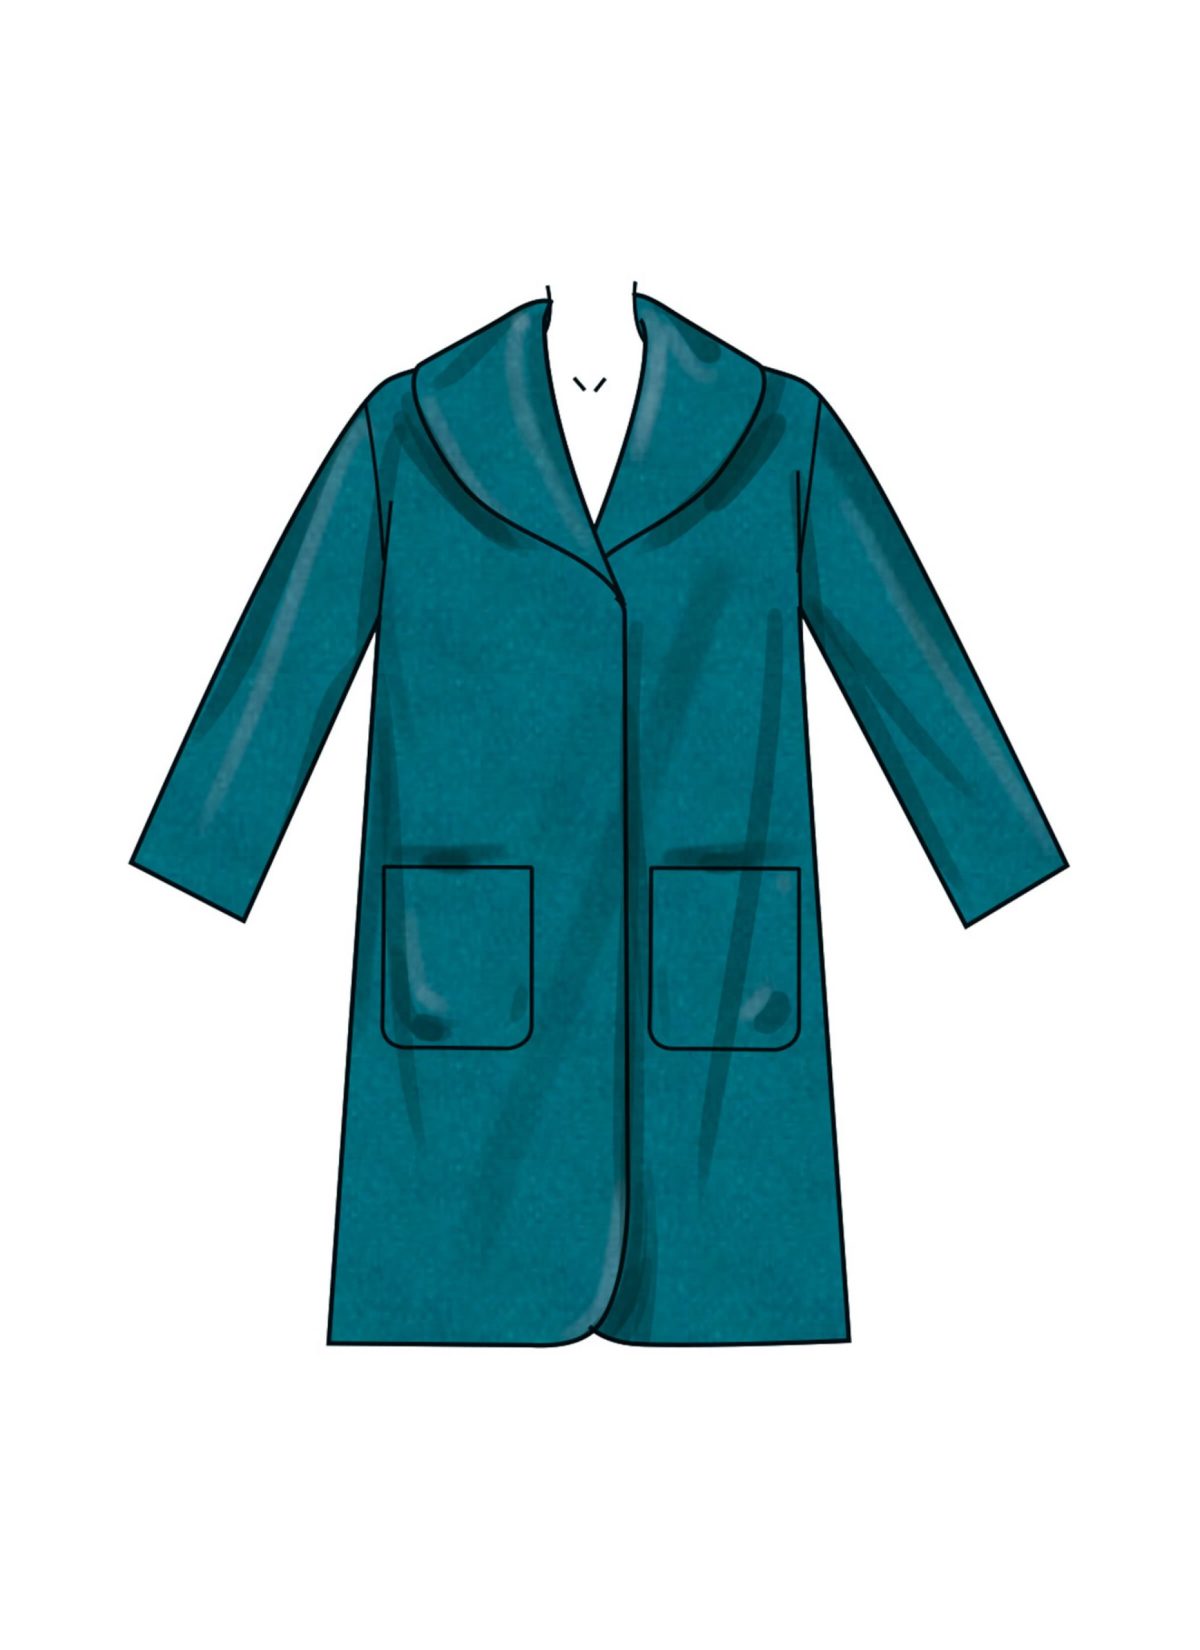 New Look Sewing Pattern N6767 Misses' Coats